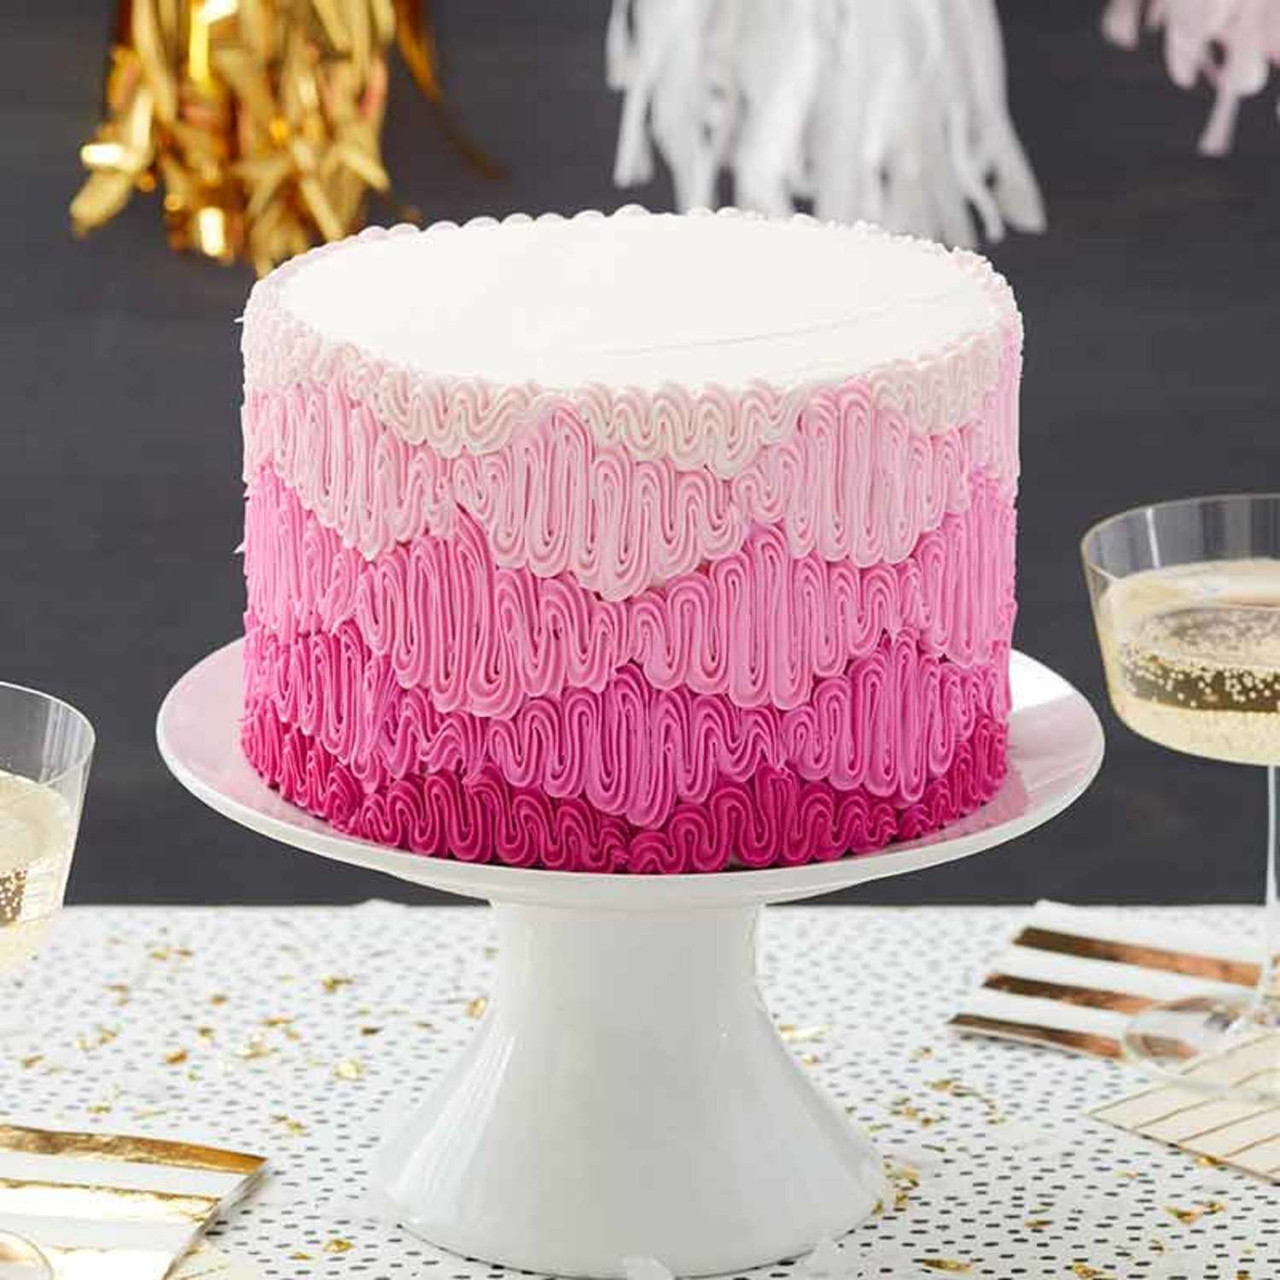 Kee's Creampuffs - Pink Ombre Cake - Kee's Creampuffs